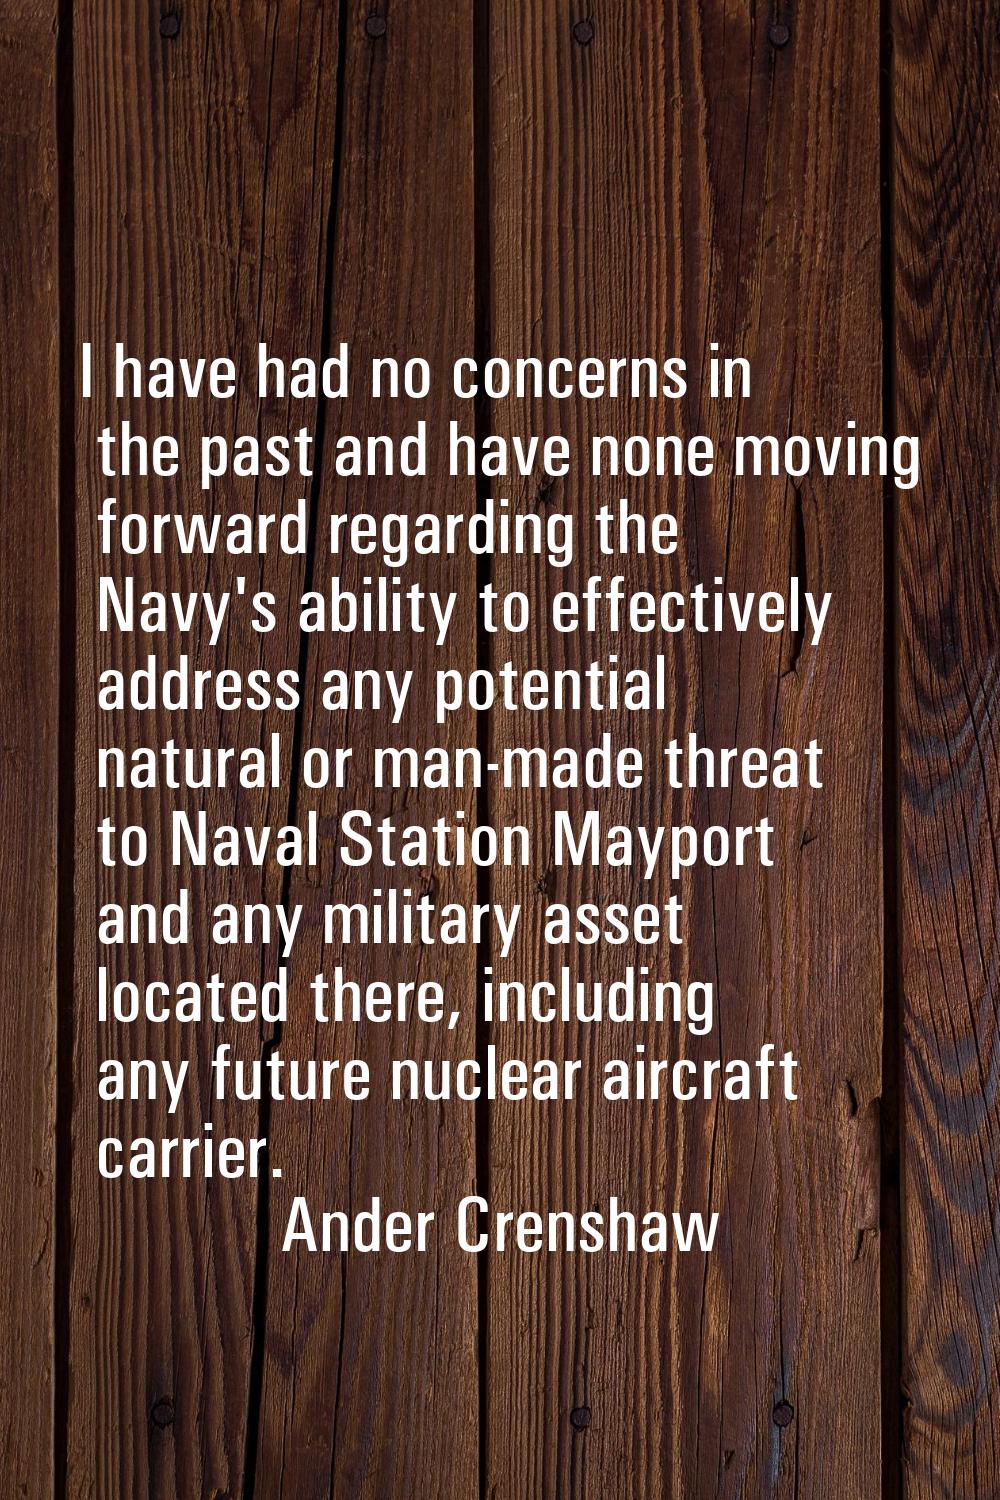 I have had no concerns in the past and have none moving forward regarding the Navy's ability to eff